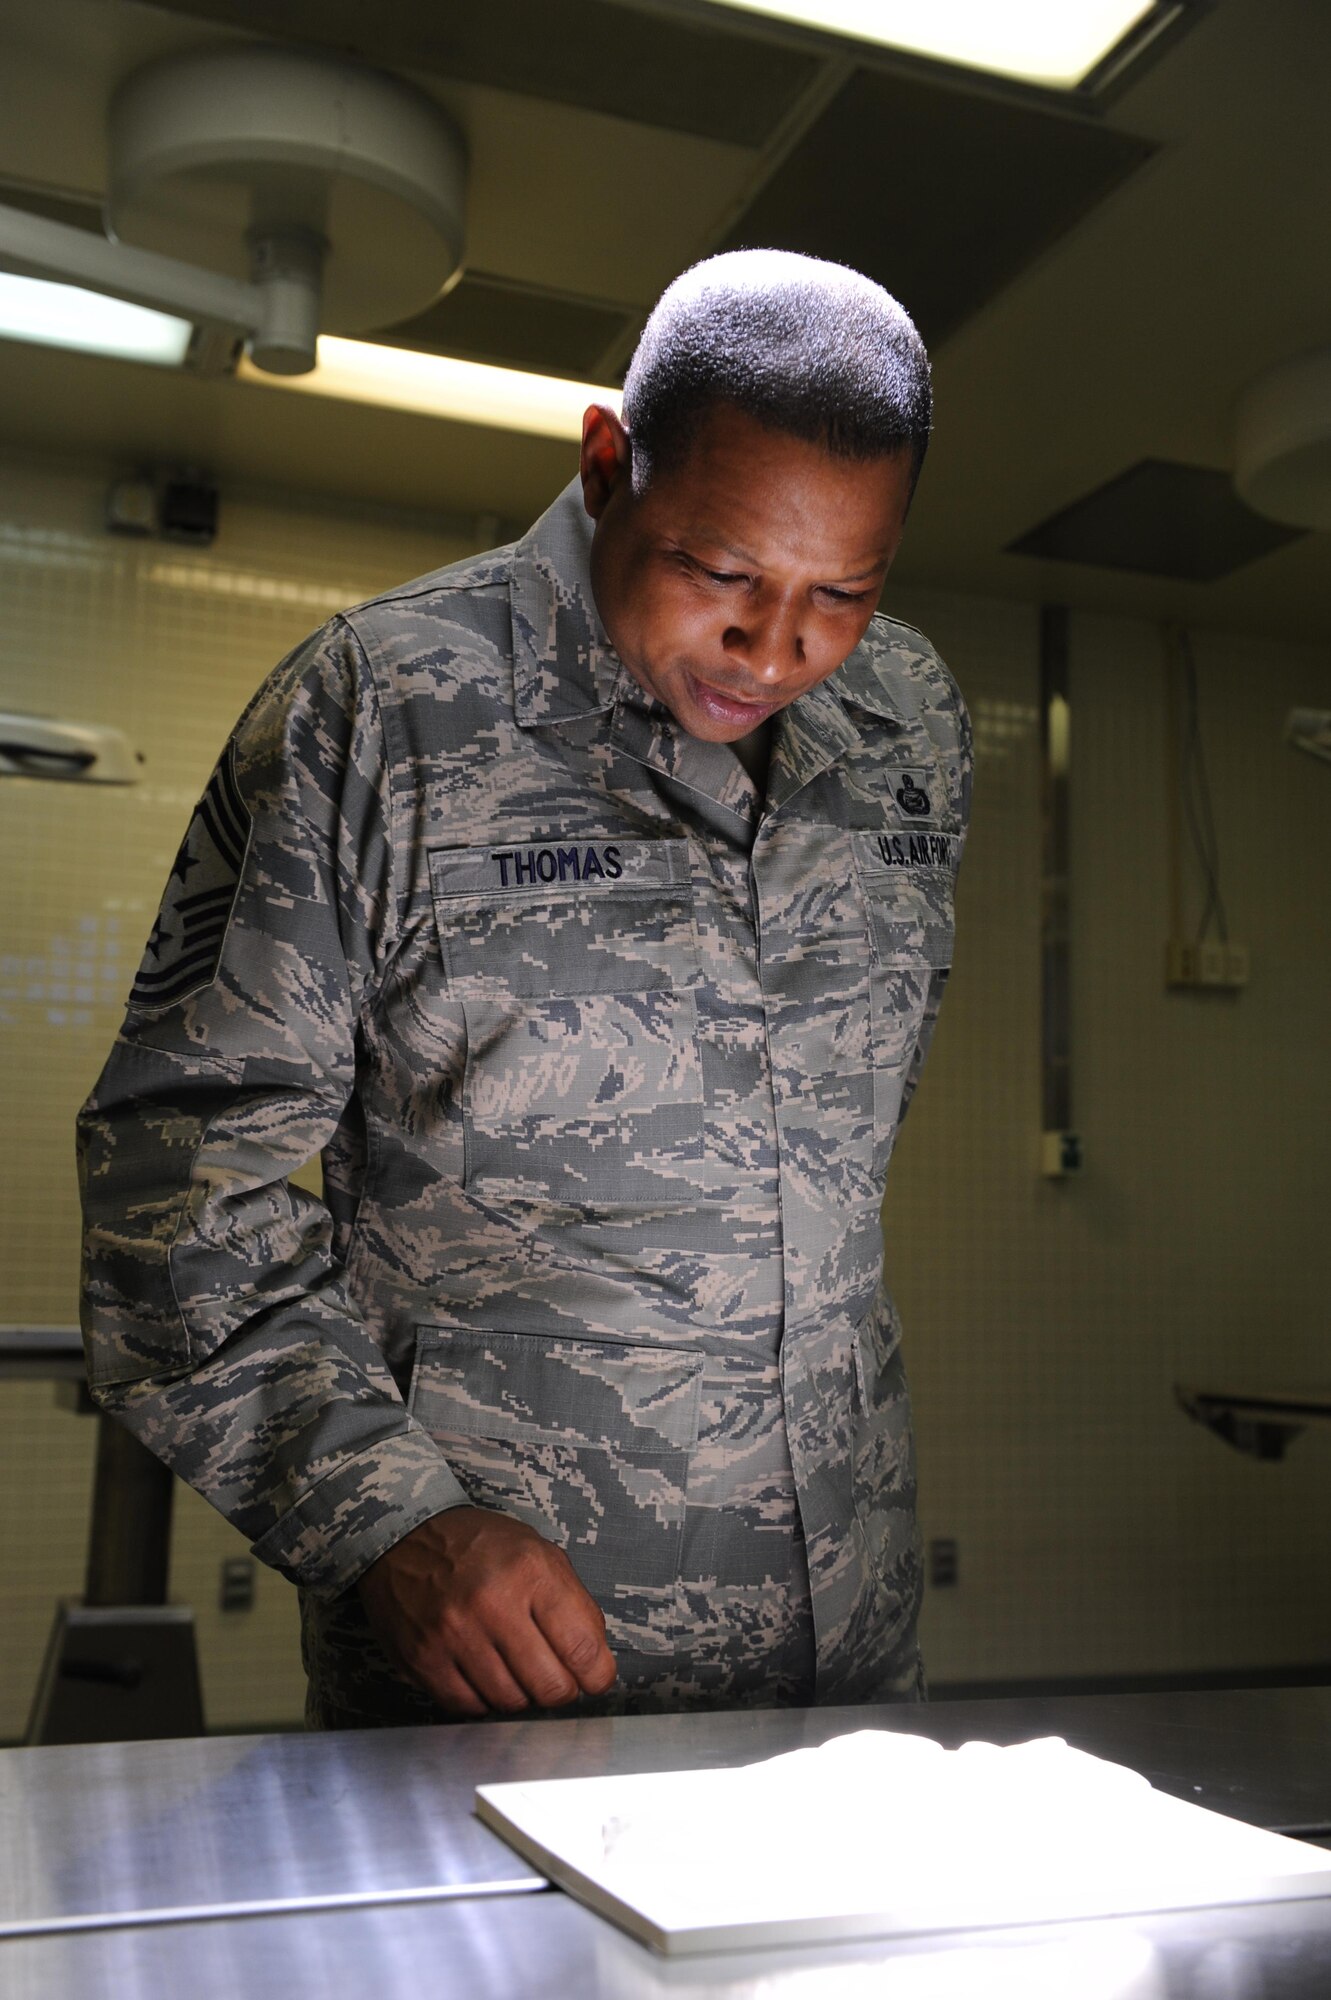 Chief Master Sgt. Farrell Thomas, 2nd Air Force command chief, views operation training equipment during an immersion tour at the clinical research lab Mar.8, 2016, Keesler Air Force Base, Miss. Thomas visited the 81st Medical Group to become oriented with group missions, operations and personnel. (U.S. Air Force photo by Kemberly Groue)